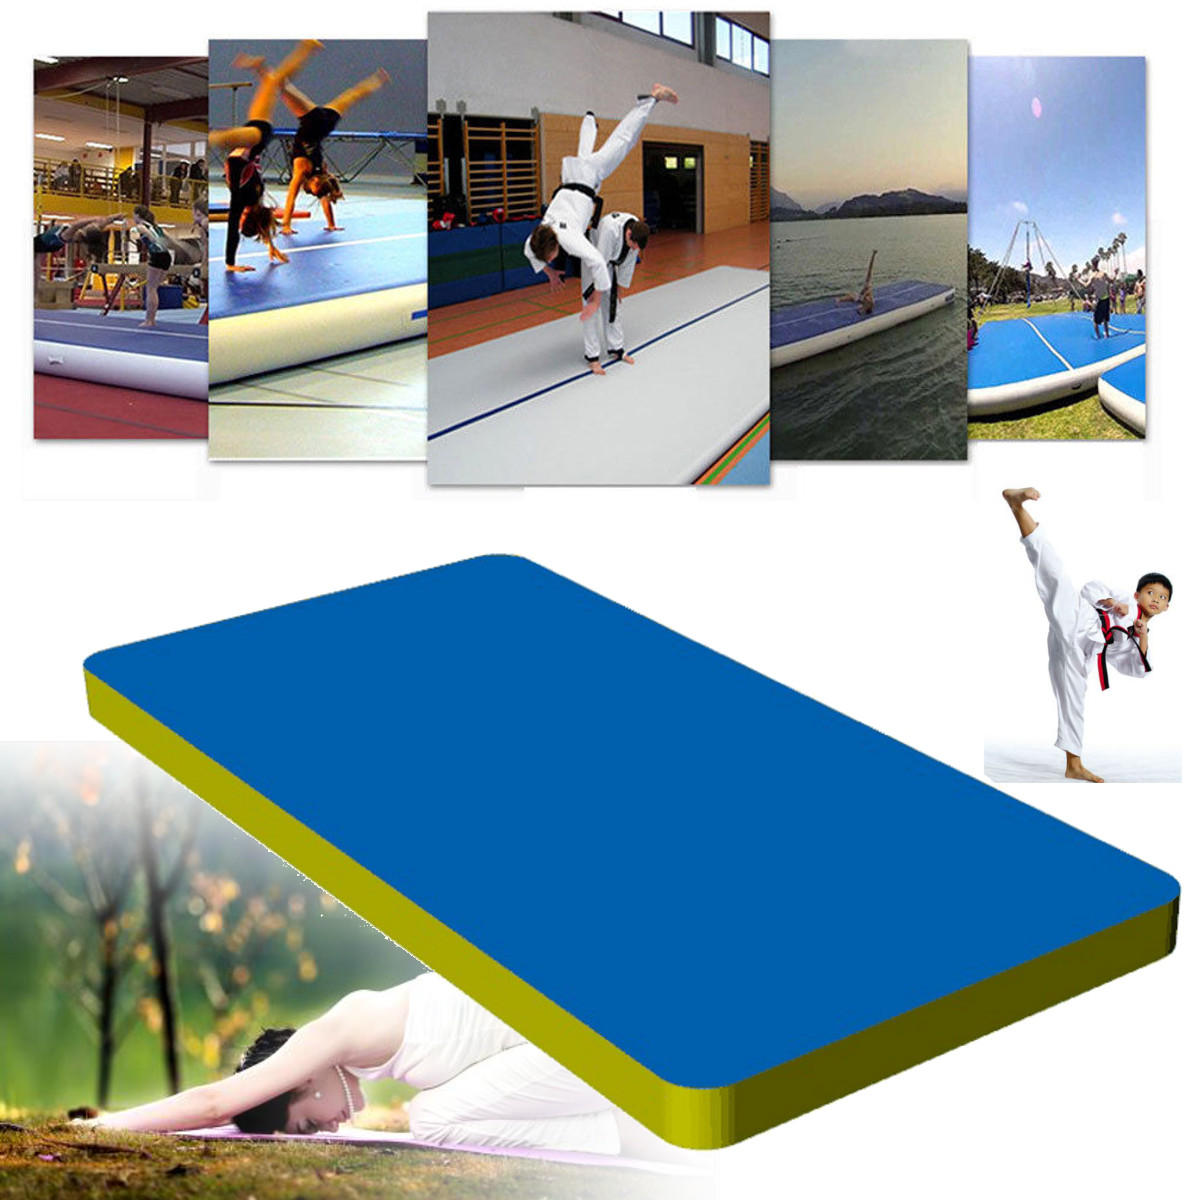 275.6x35.4x3.9  Inflatable Air Track Mat Outdoor Home Training Tumbling Gymnastics Protective Pad